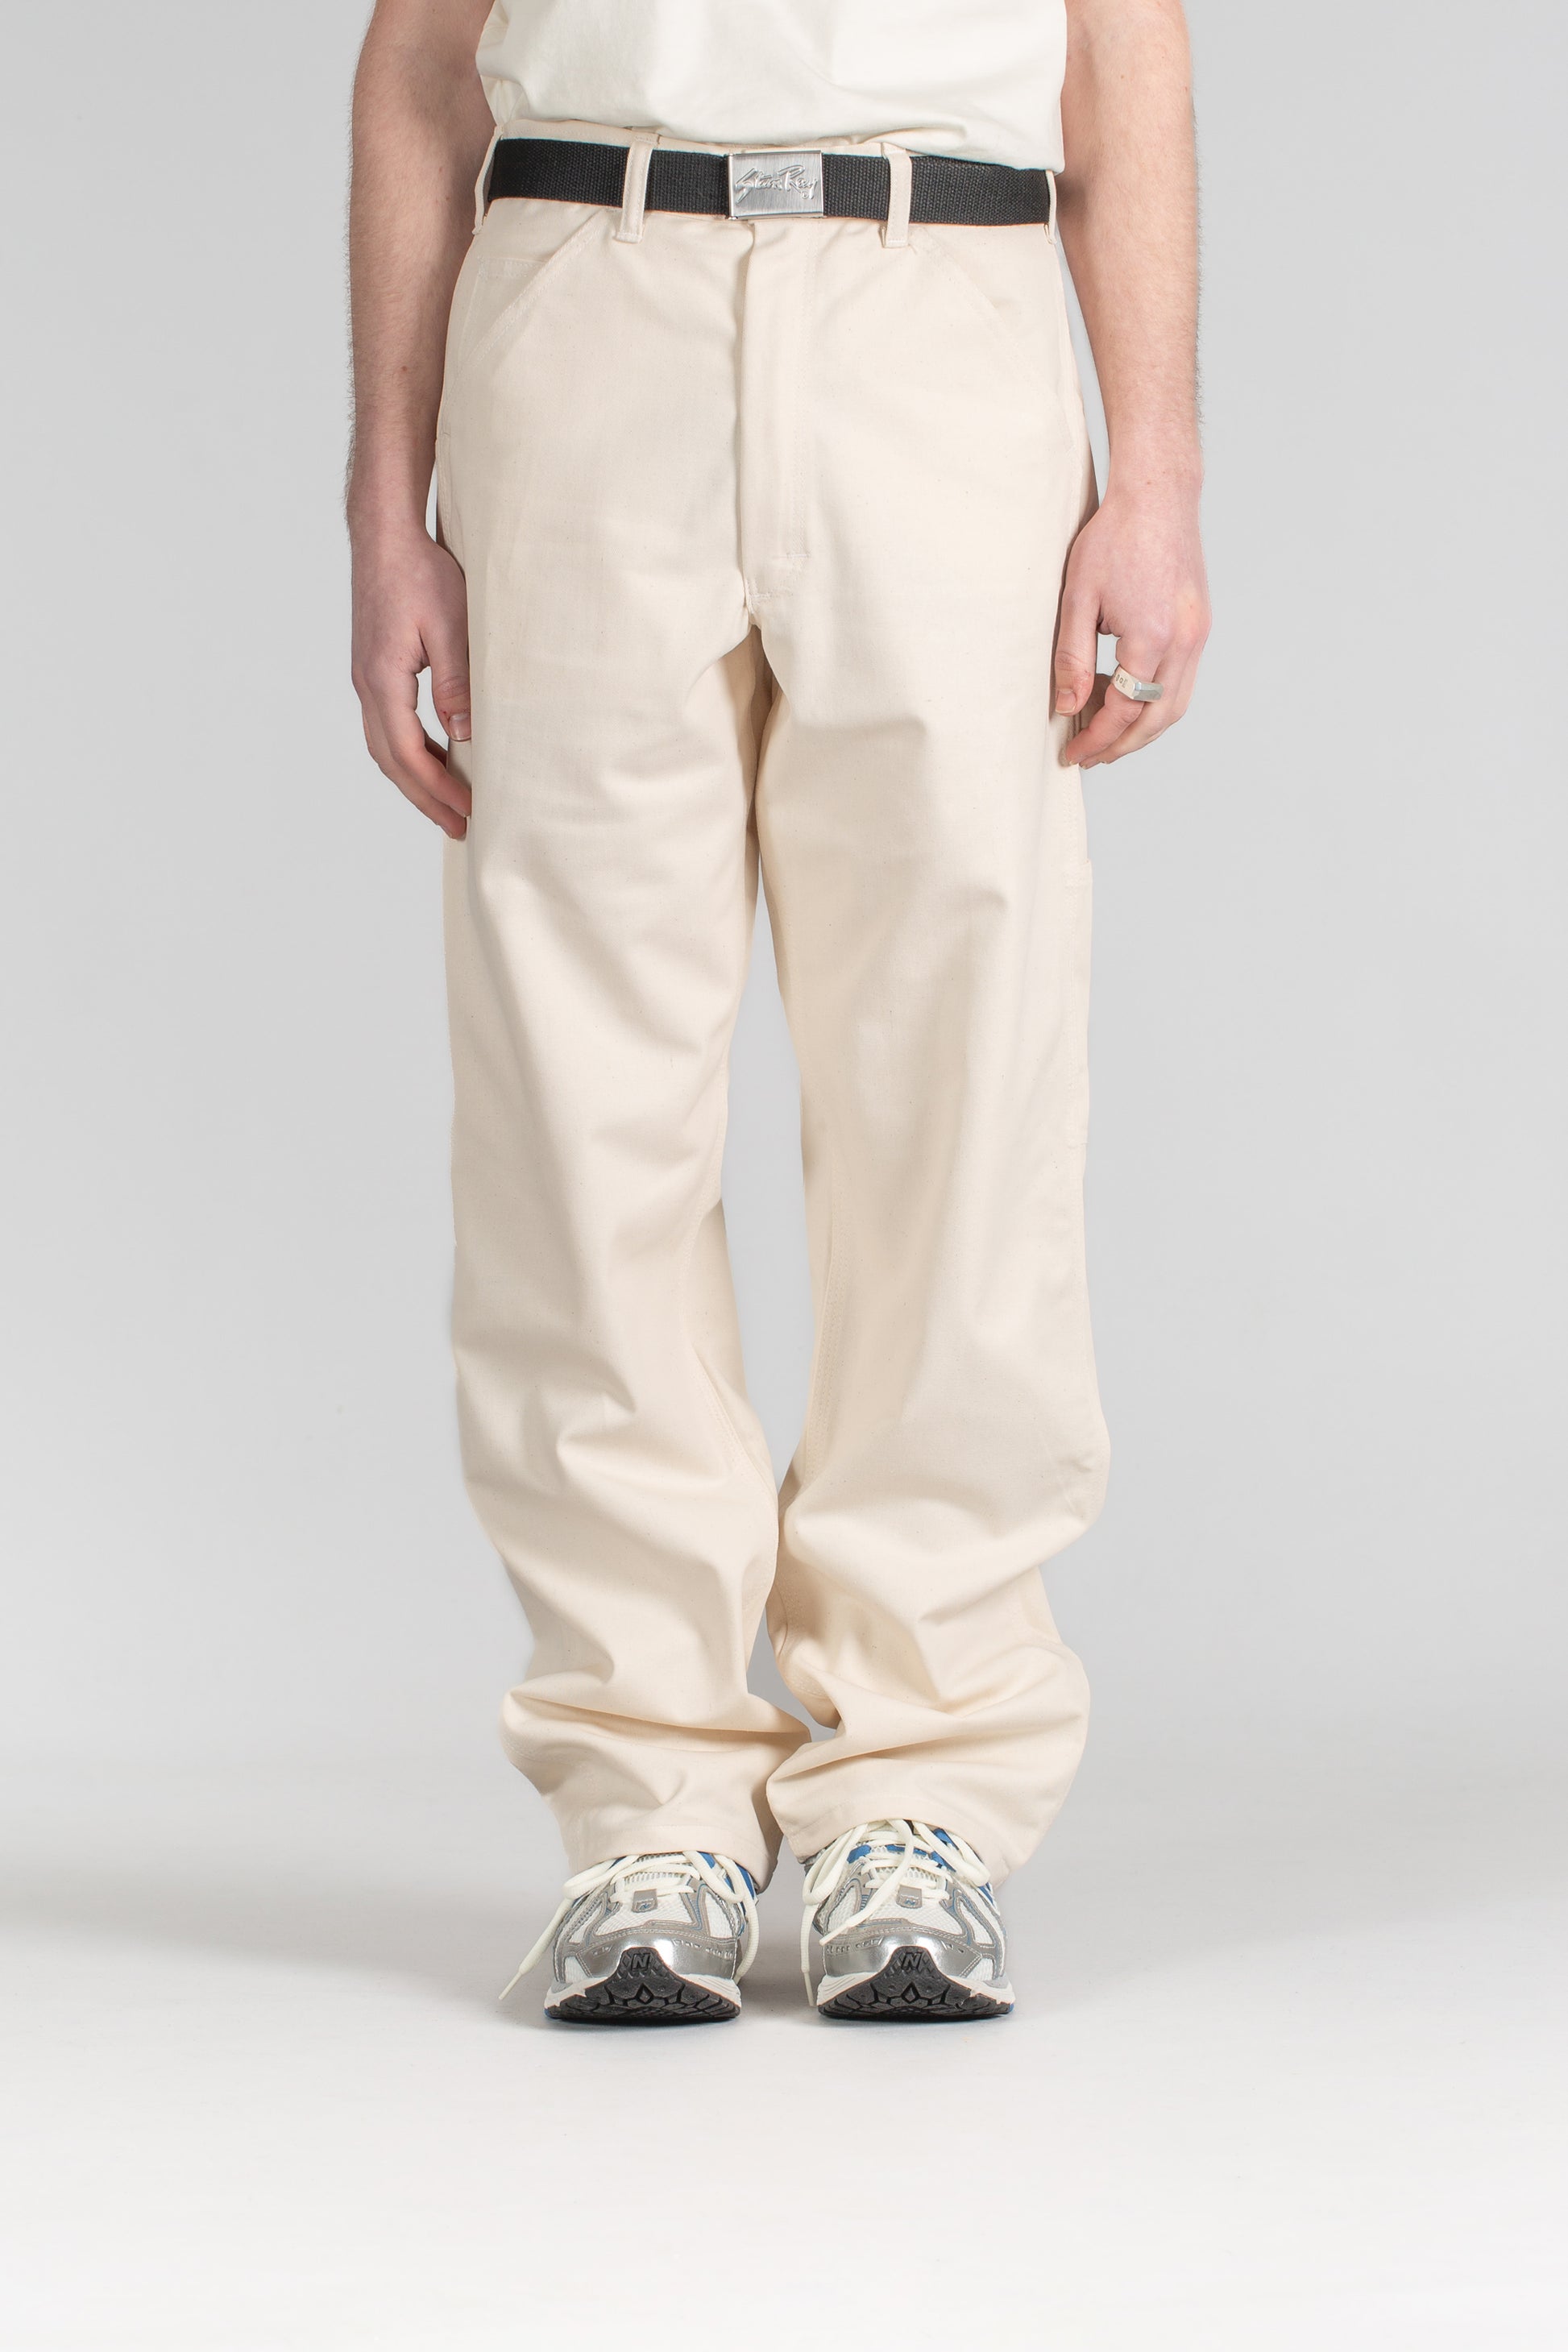 OG Painter Pant (Natural Drill) – Stan Ray